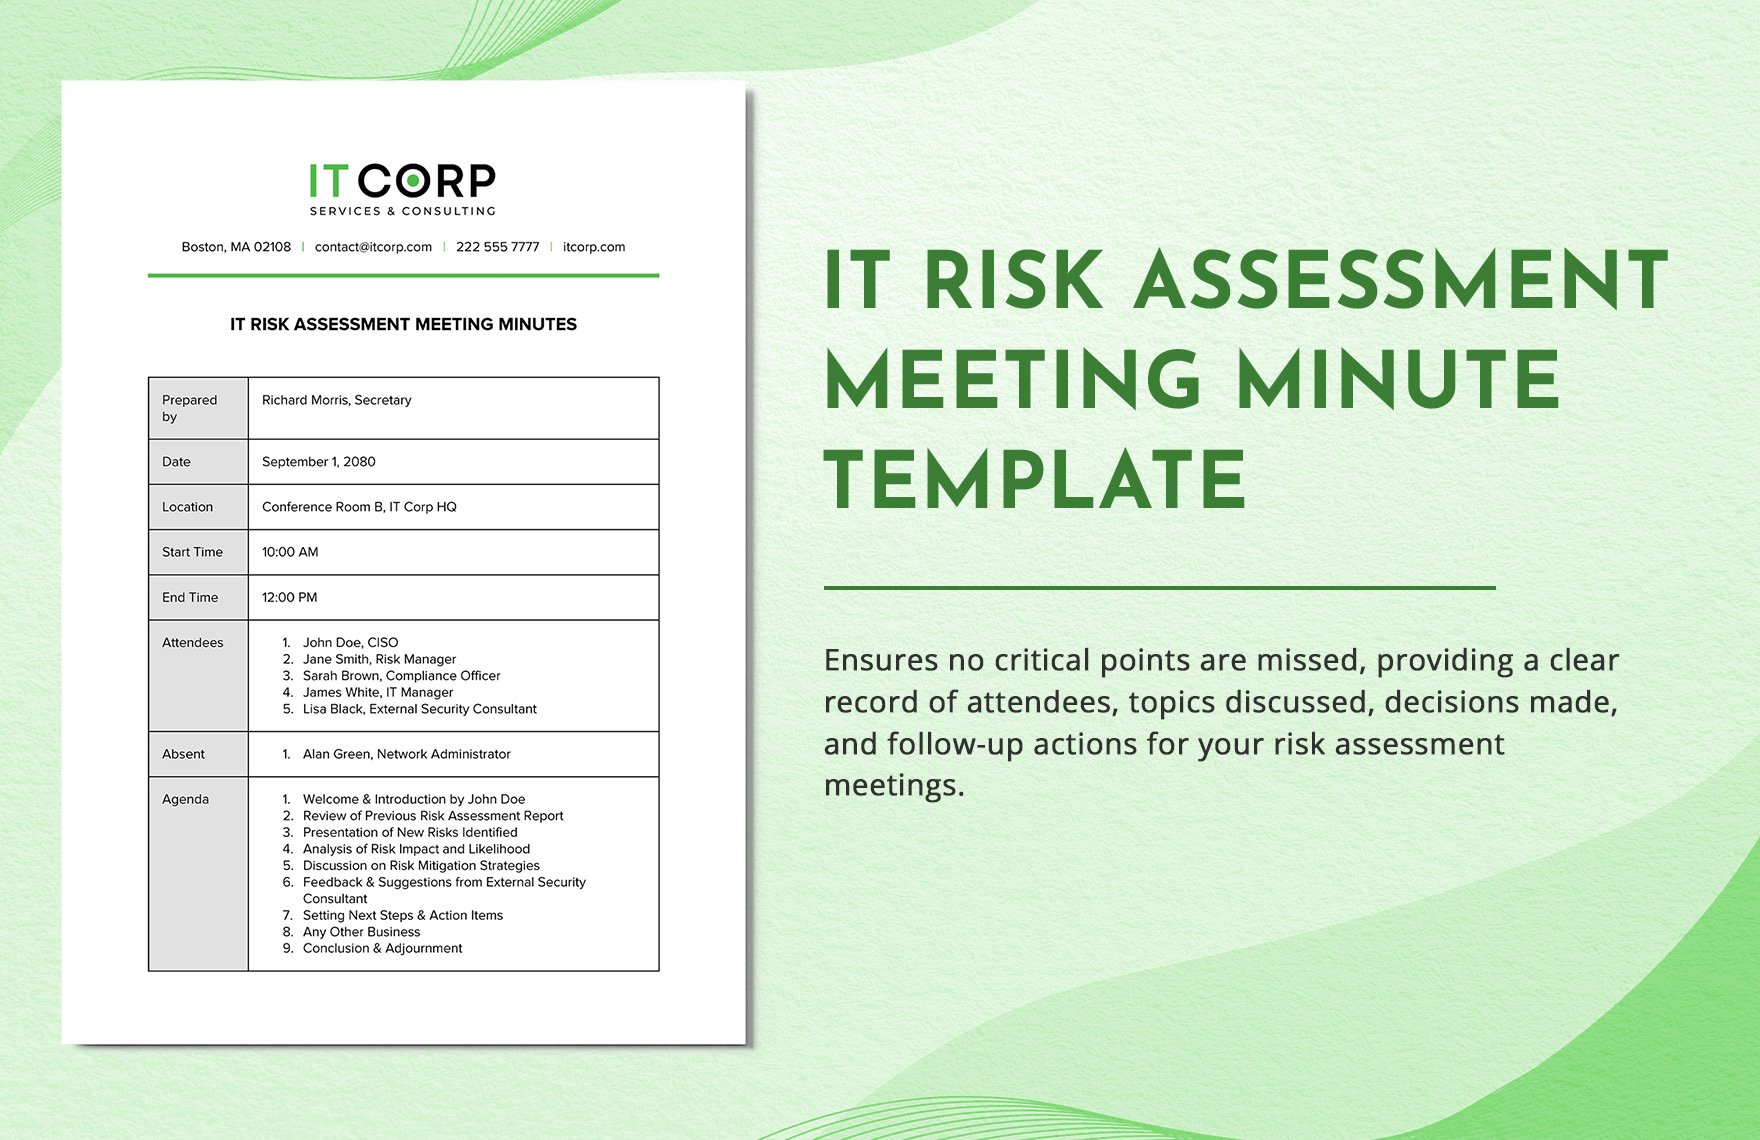 IT Risk Assessment Meeting Minute Template